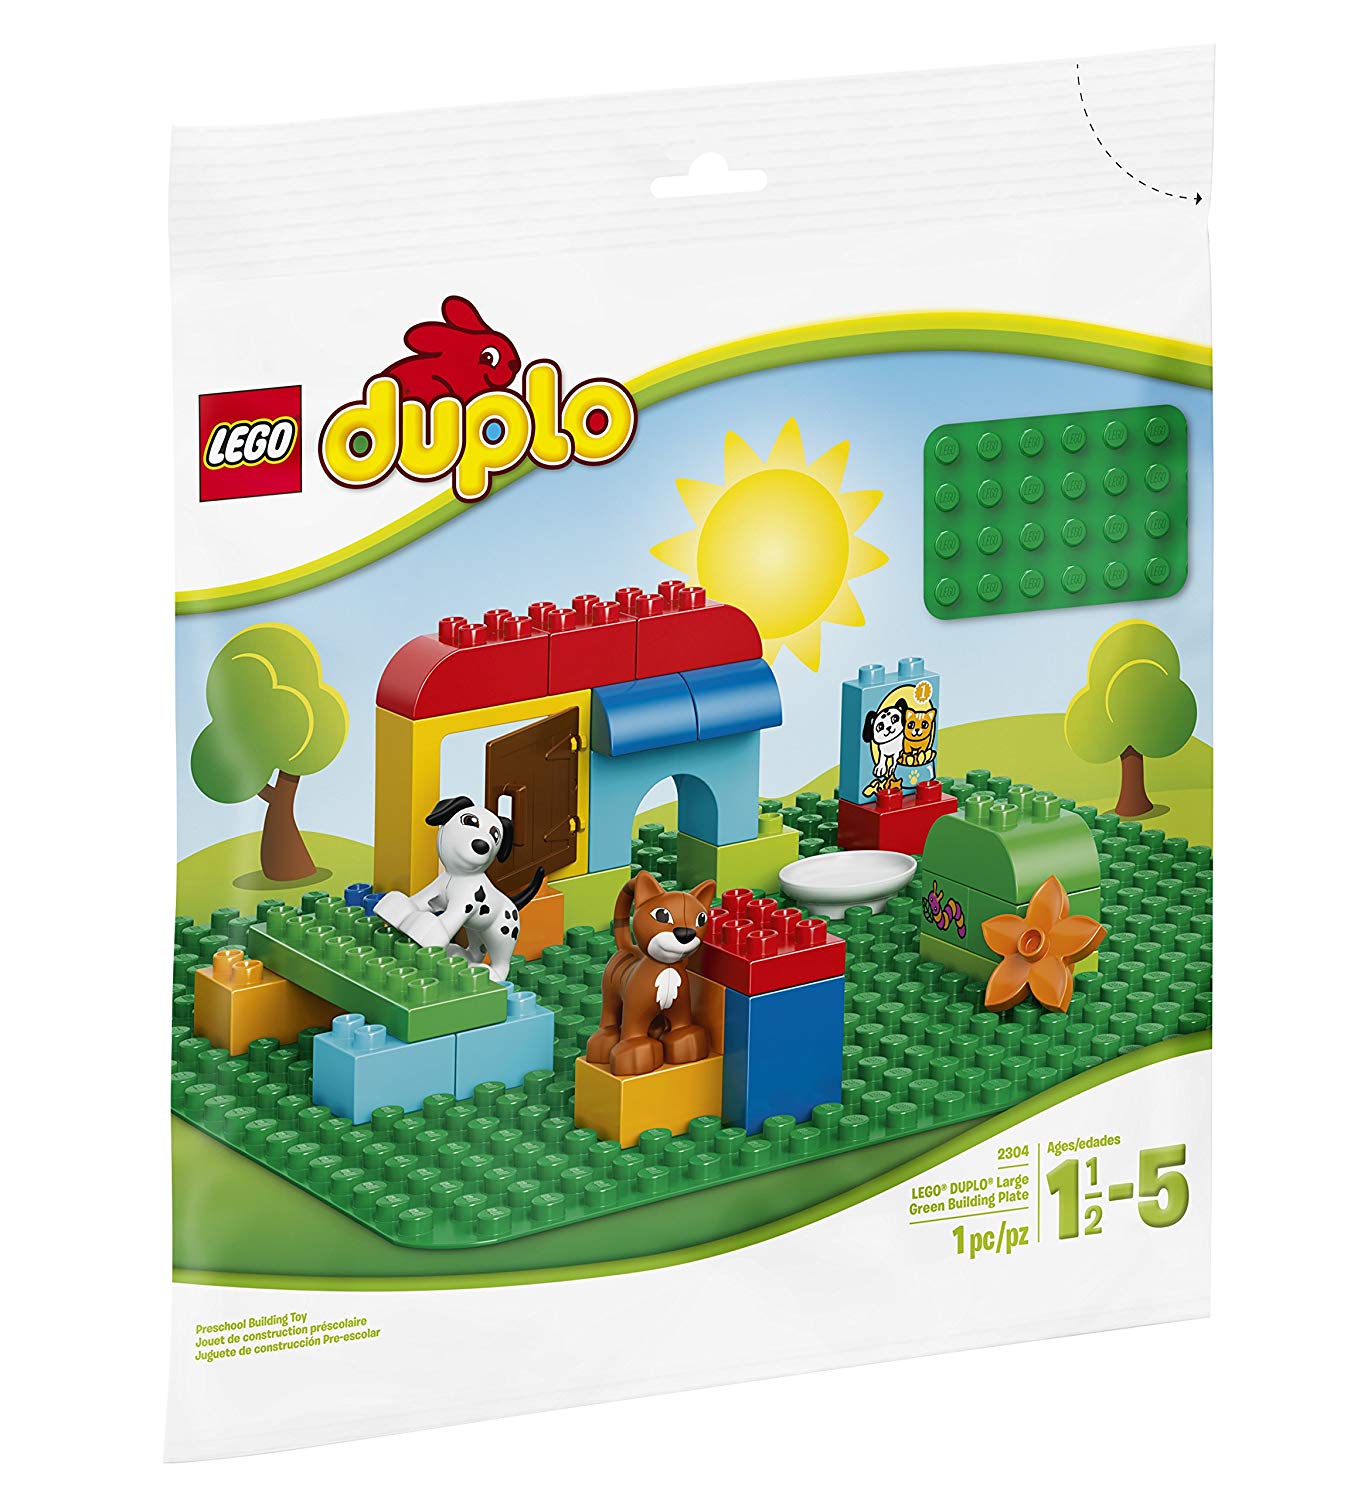 LEGO Duplo Large Plate 38.1 cm x 38.1 cm Green 2304 Creative Toy (Pack of 1